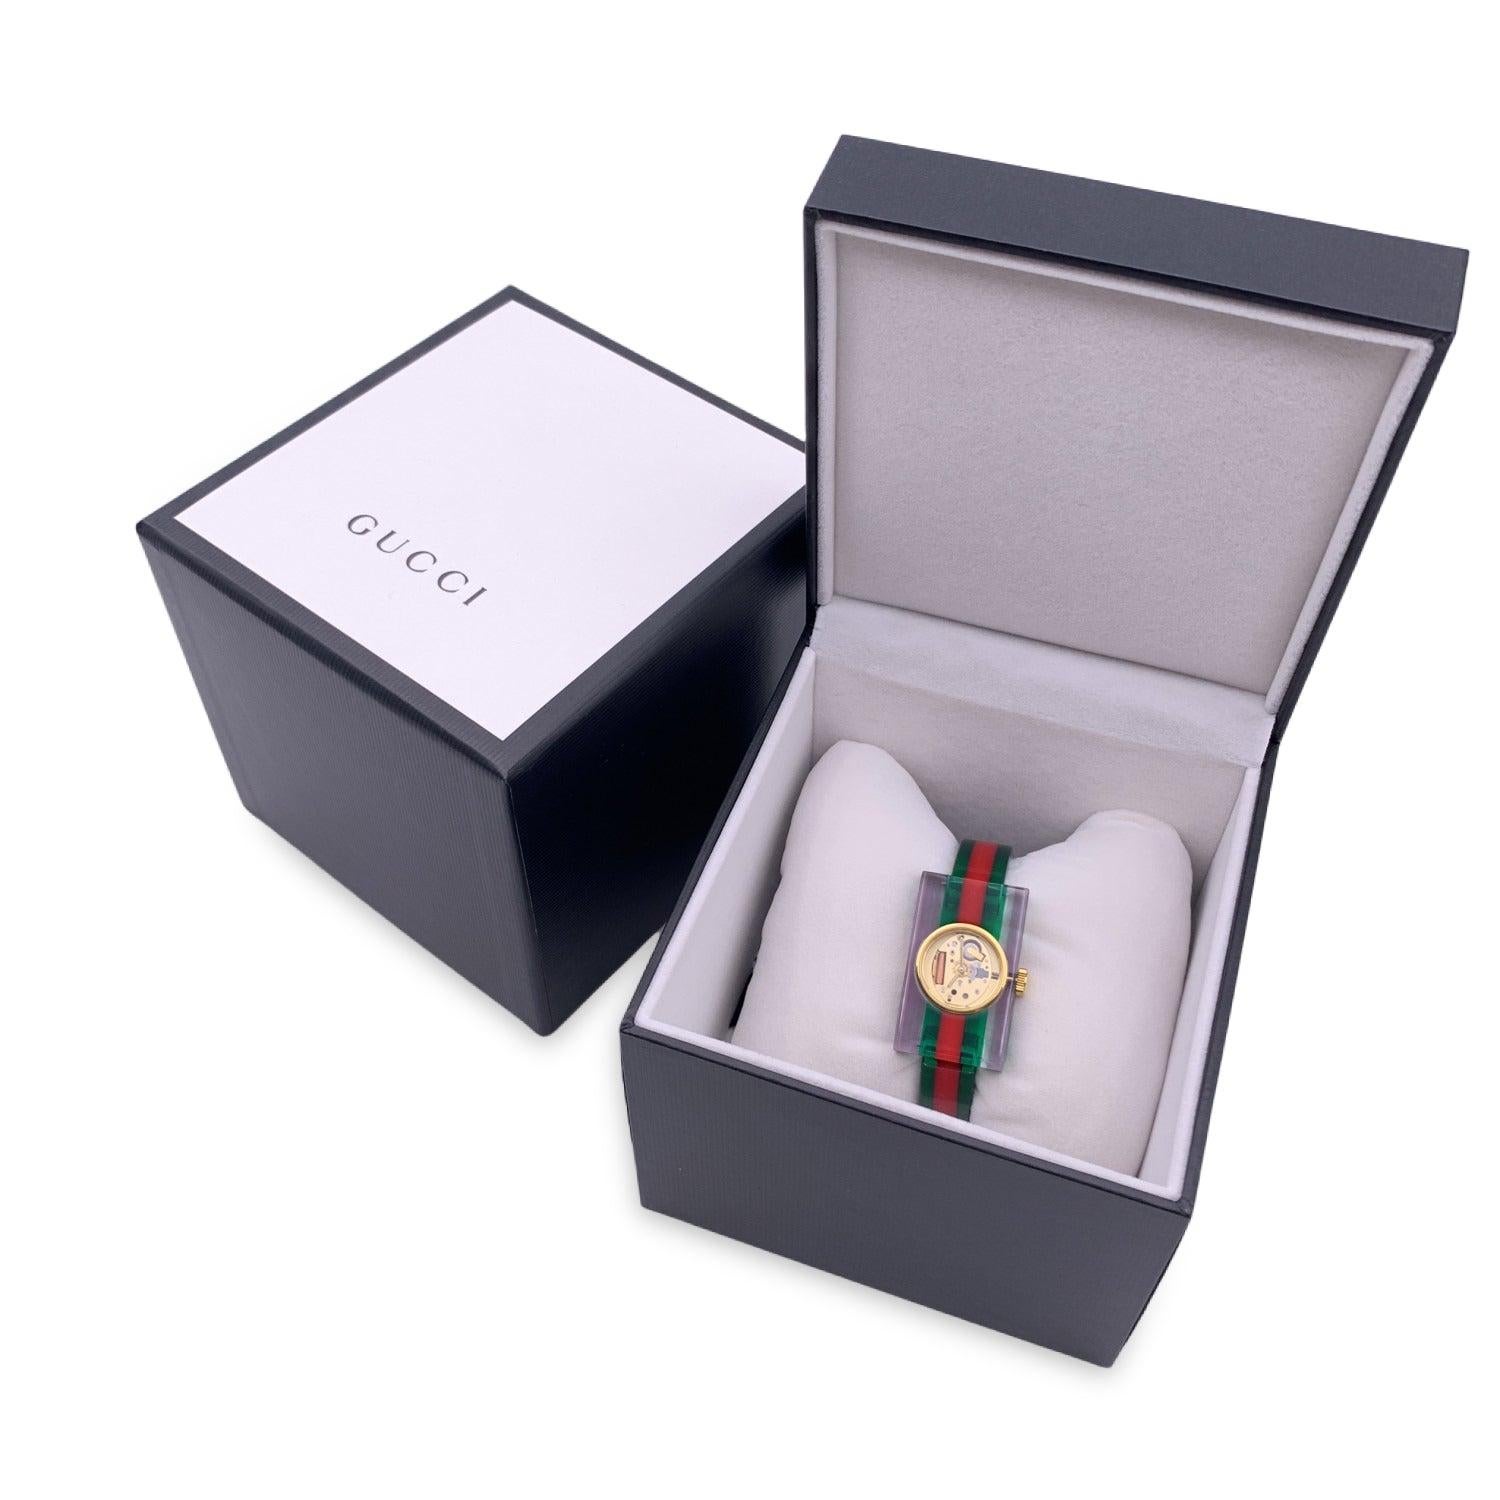 Beautiful bangle wristwatch,mod. 143.5, by GUCCI. Made of translucent green/red/green plexiglass, from the 2018 Resort collection. It features a plexiglass rectangular frame with a round gold-tone stainless steel round case. Gold metal skeleton